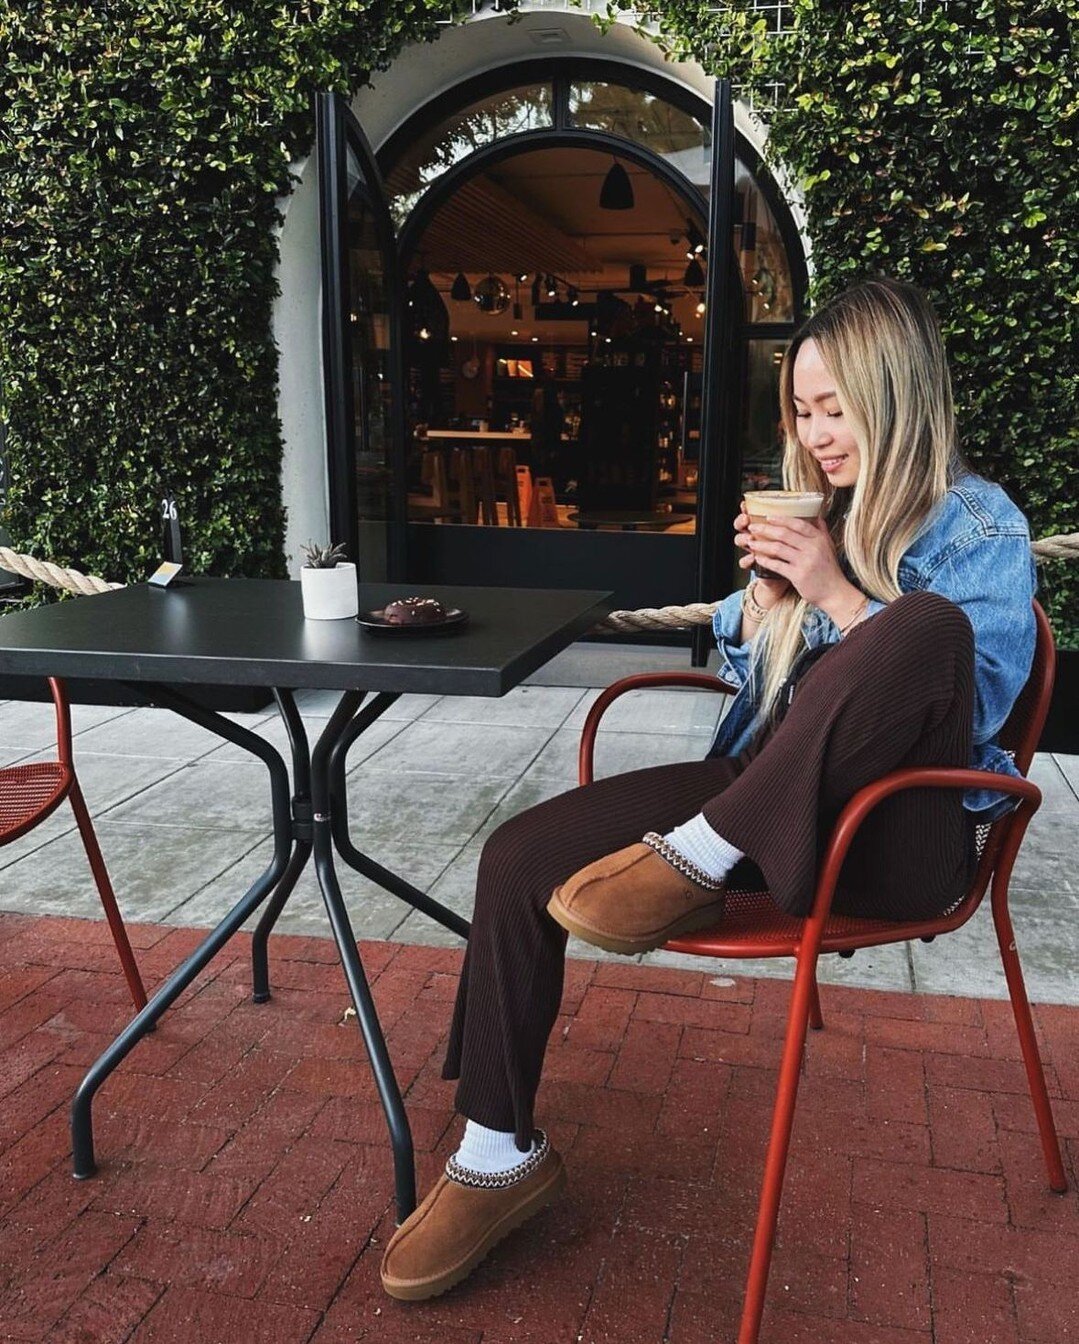 Slowly sipping into the week ahead. 😊

No matter what your beverage choice is, we've got you covered! From coffee to tea to your favorite wine and drinks, we've got everything stocked and ready for you to tackle the week. 

So take a sip, take a bre